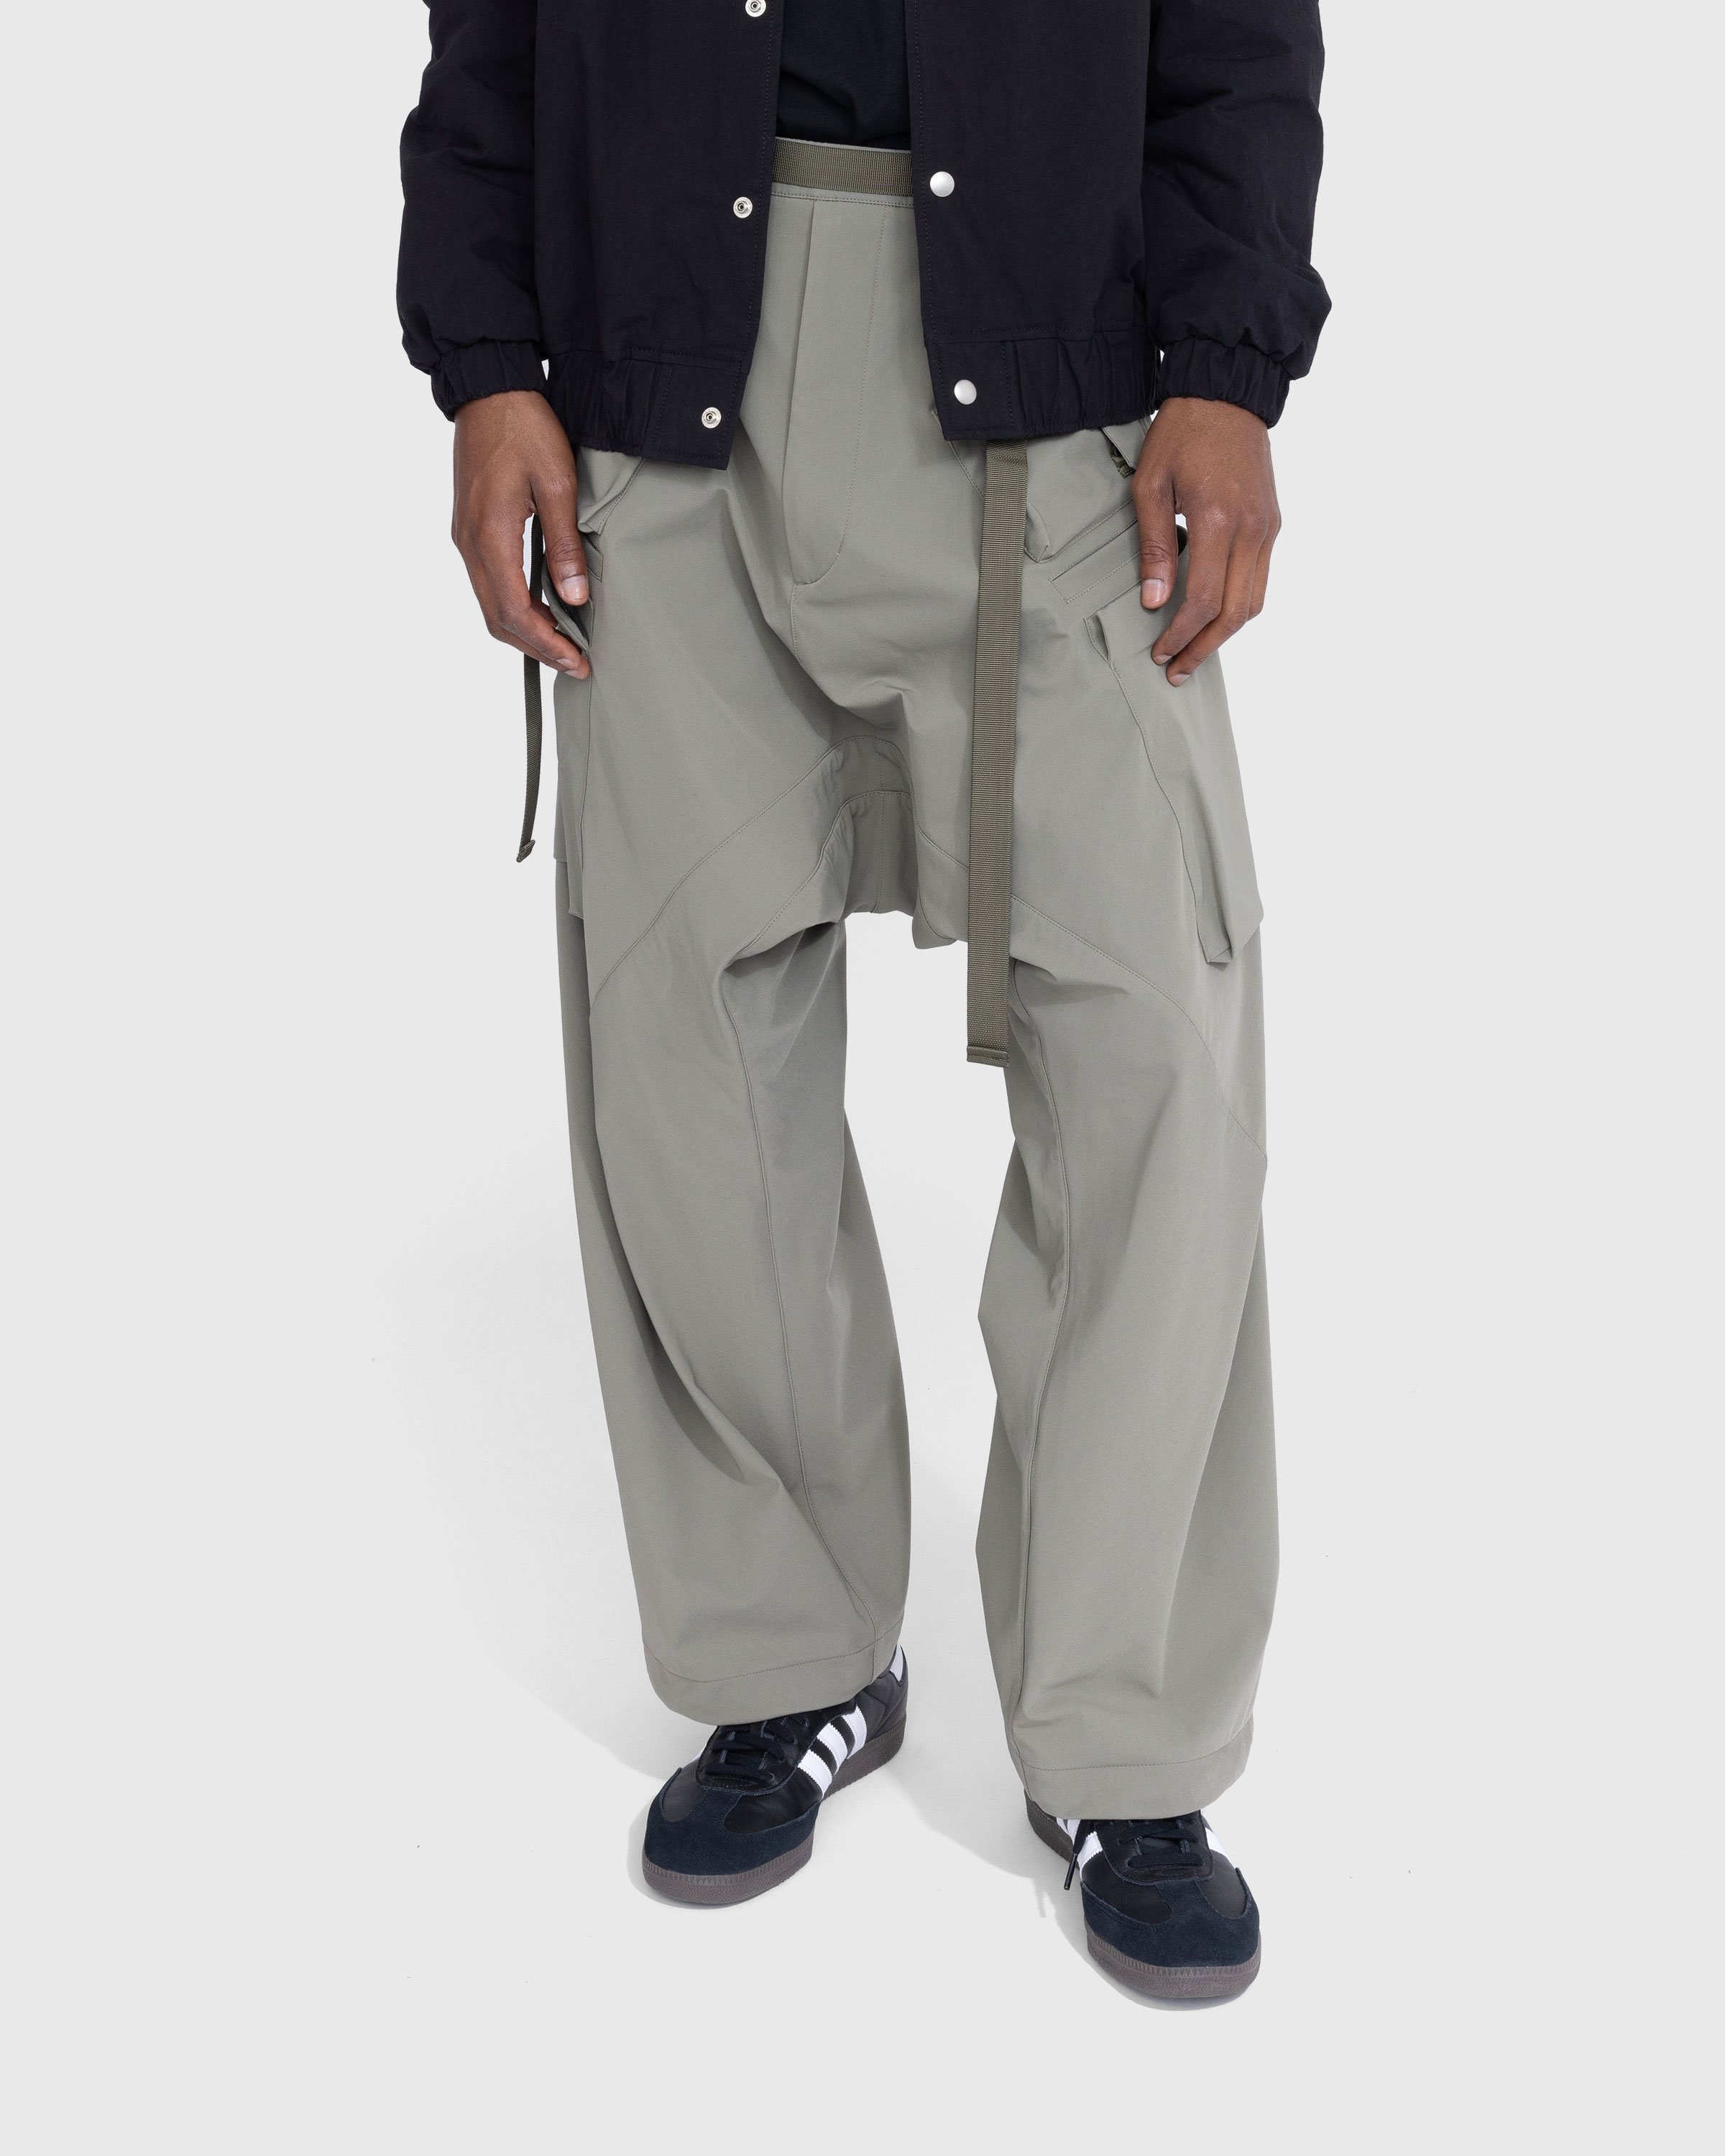 ACRONYM - P30AL-DS Pant Alpha Green - Clothing - Green - Image 2